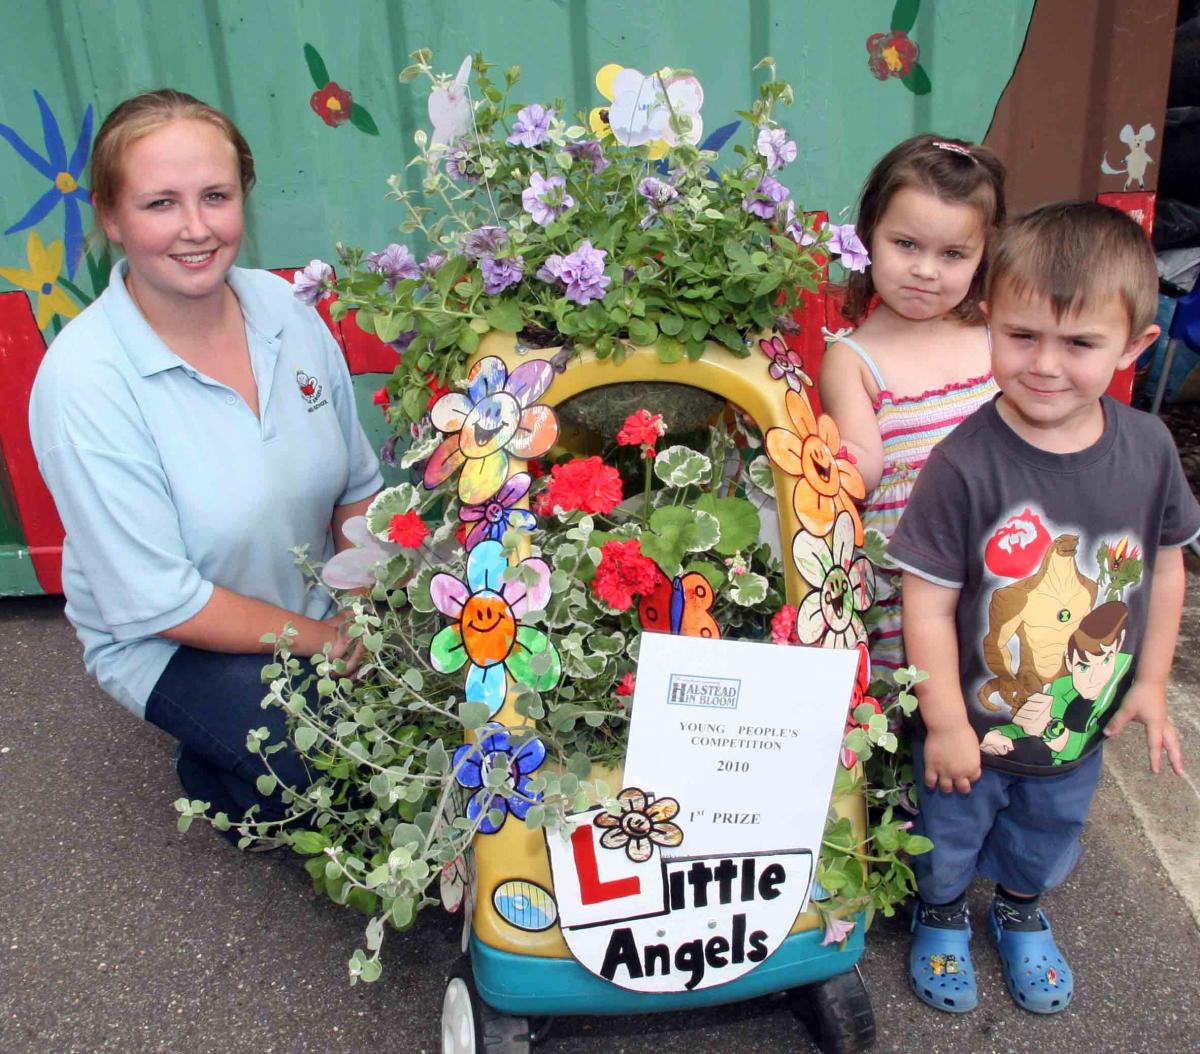 JUDGING: Winners of the childrens section of the Halstead in Bloom Little Angels Pre School. l-r, Daniella Kenny pictured with Eddy Parkinson, 4, and Poppy Quinn, 3 in 2010